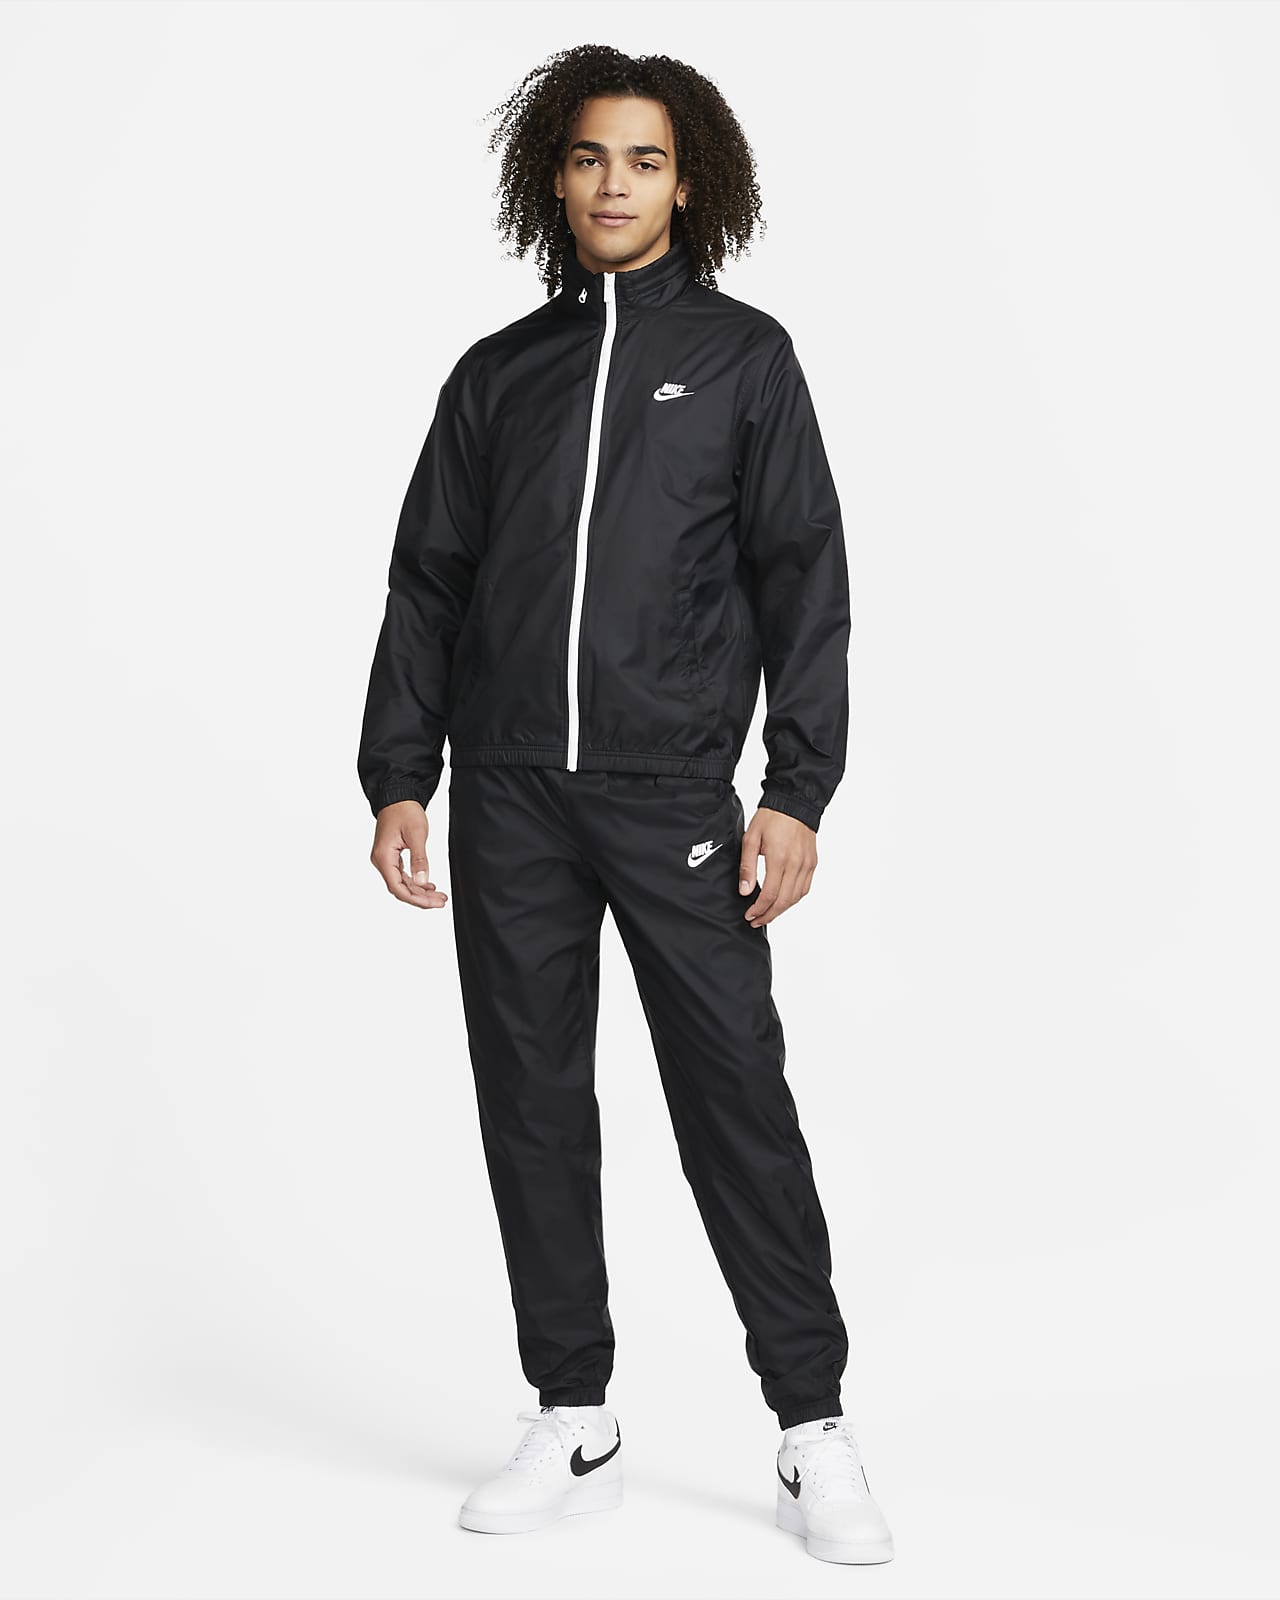 https://static.nike.com/a/images/t_PDP_1280_v1/f_auto,q_auto:eco/7d0fd1bf-9994-4ad4-abe0-efd4c6f7c5b0/sportswear-club-lined-woven-tracksuit-hXSgkG.png